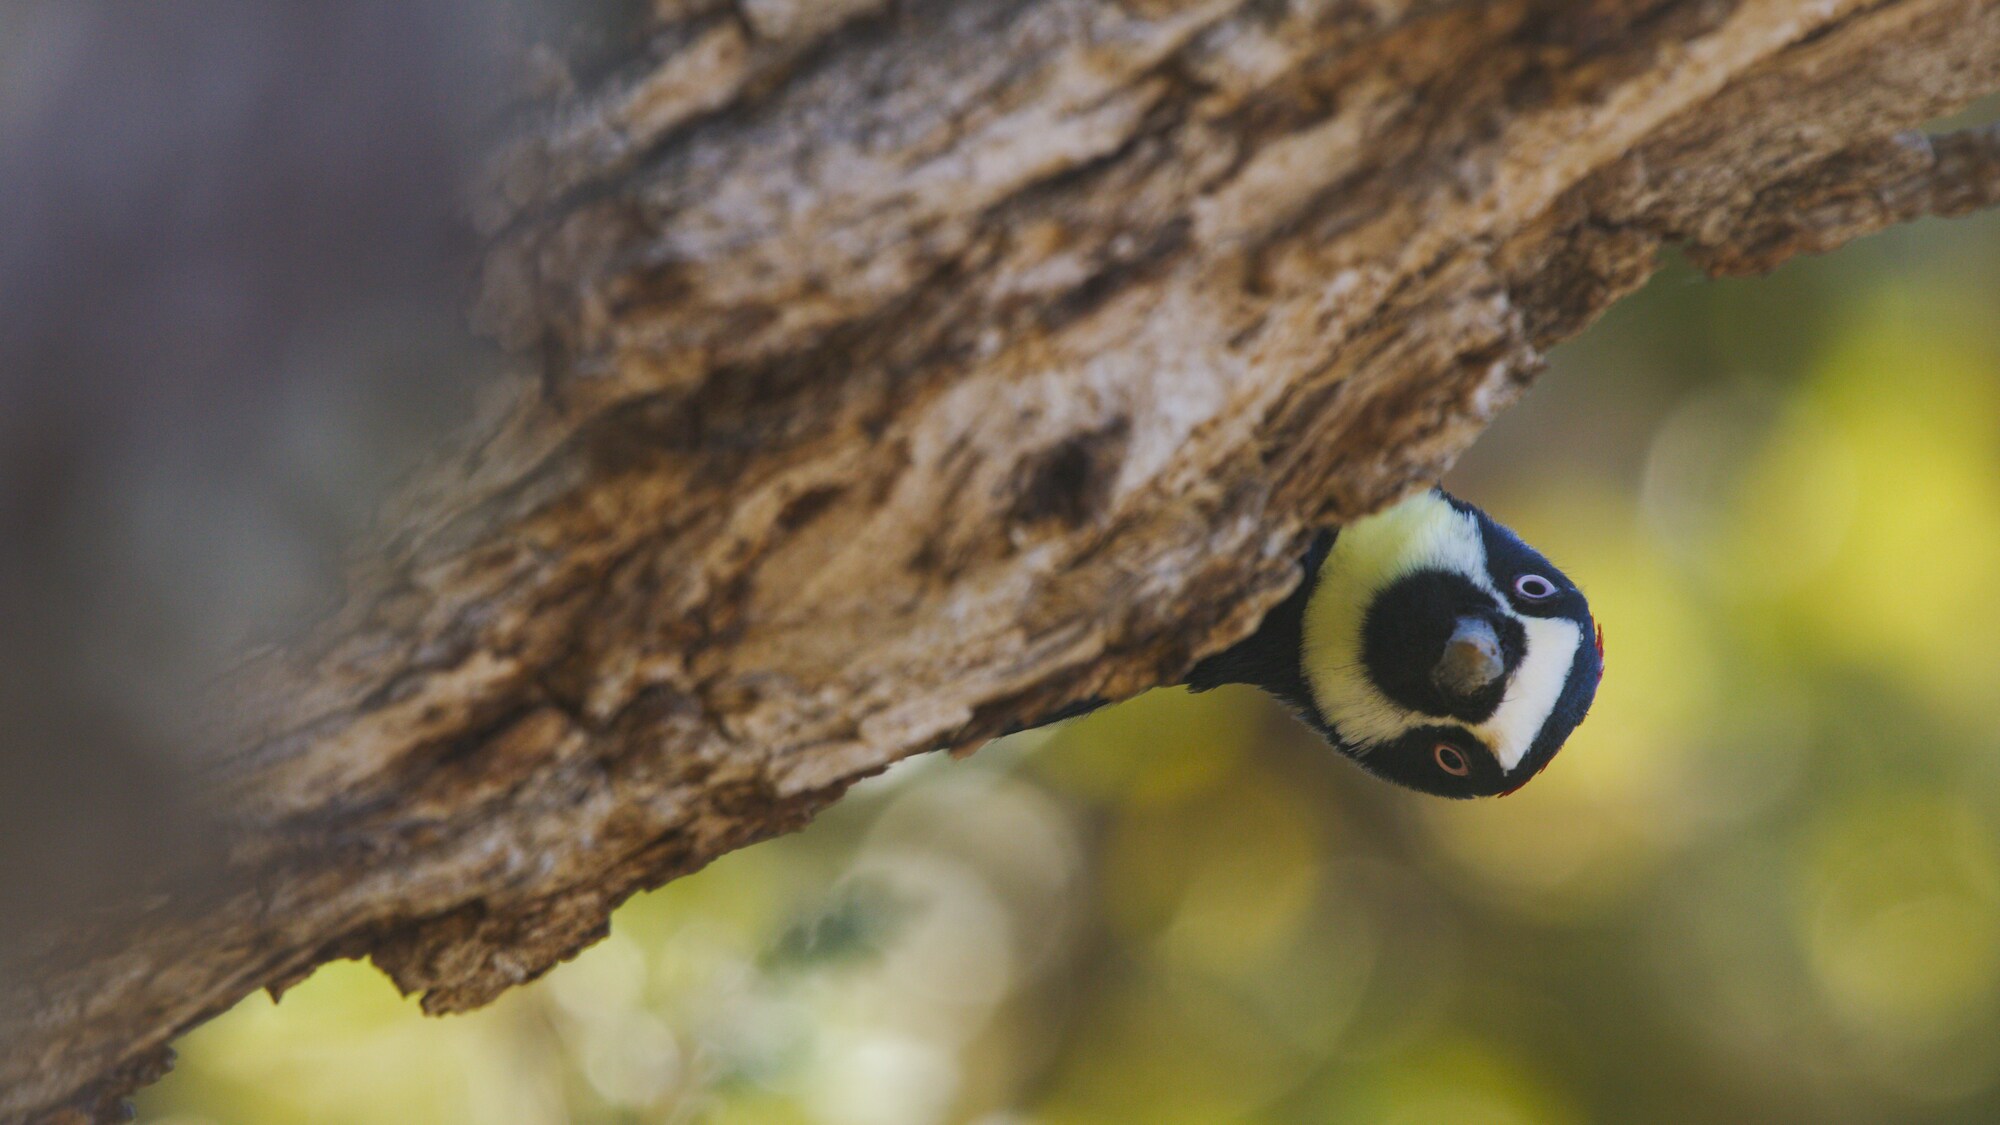 An acorn woodpecker looks out from behind a branch in California's thriving oak woodland. (National Geographic for Disney+)